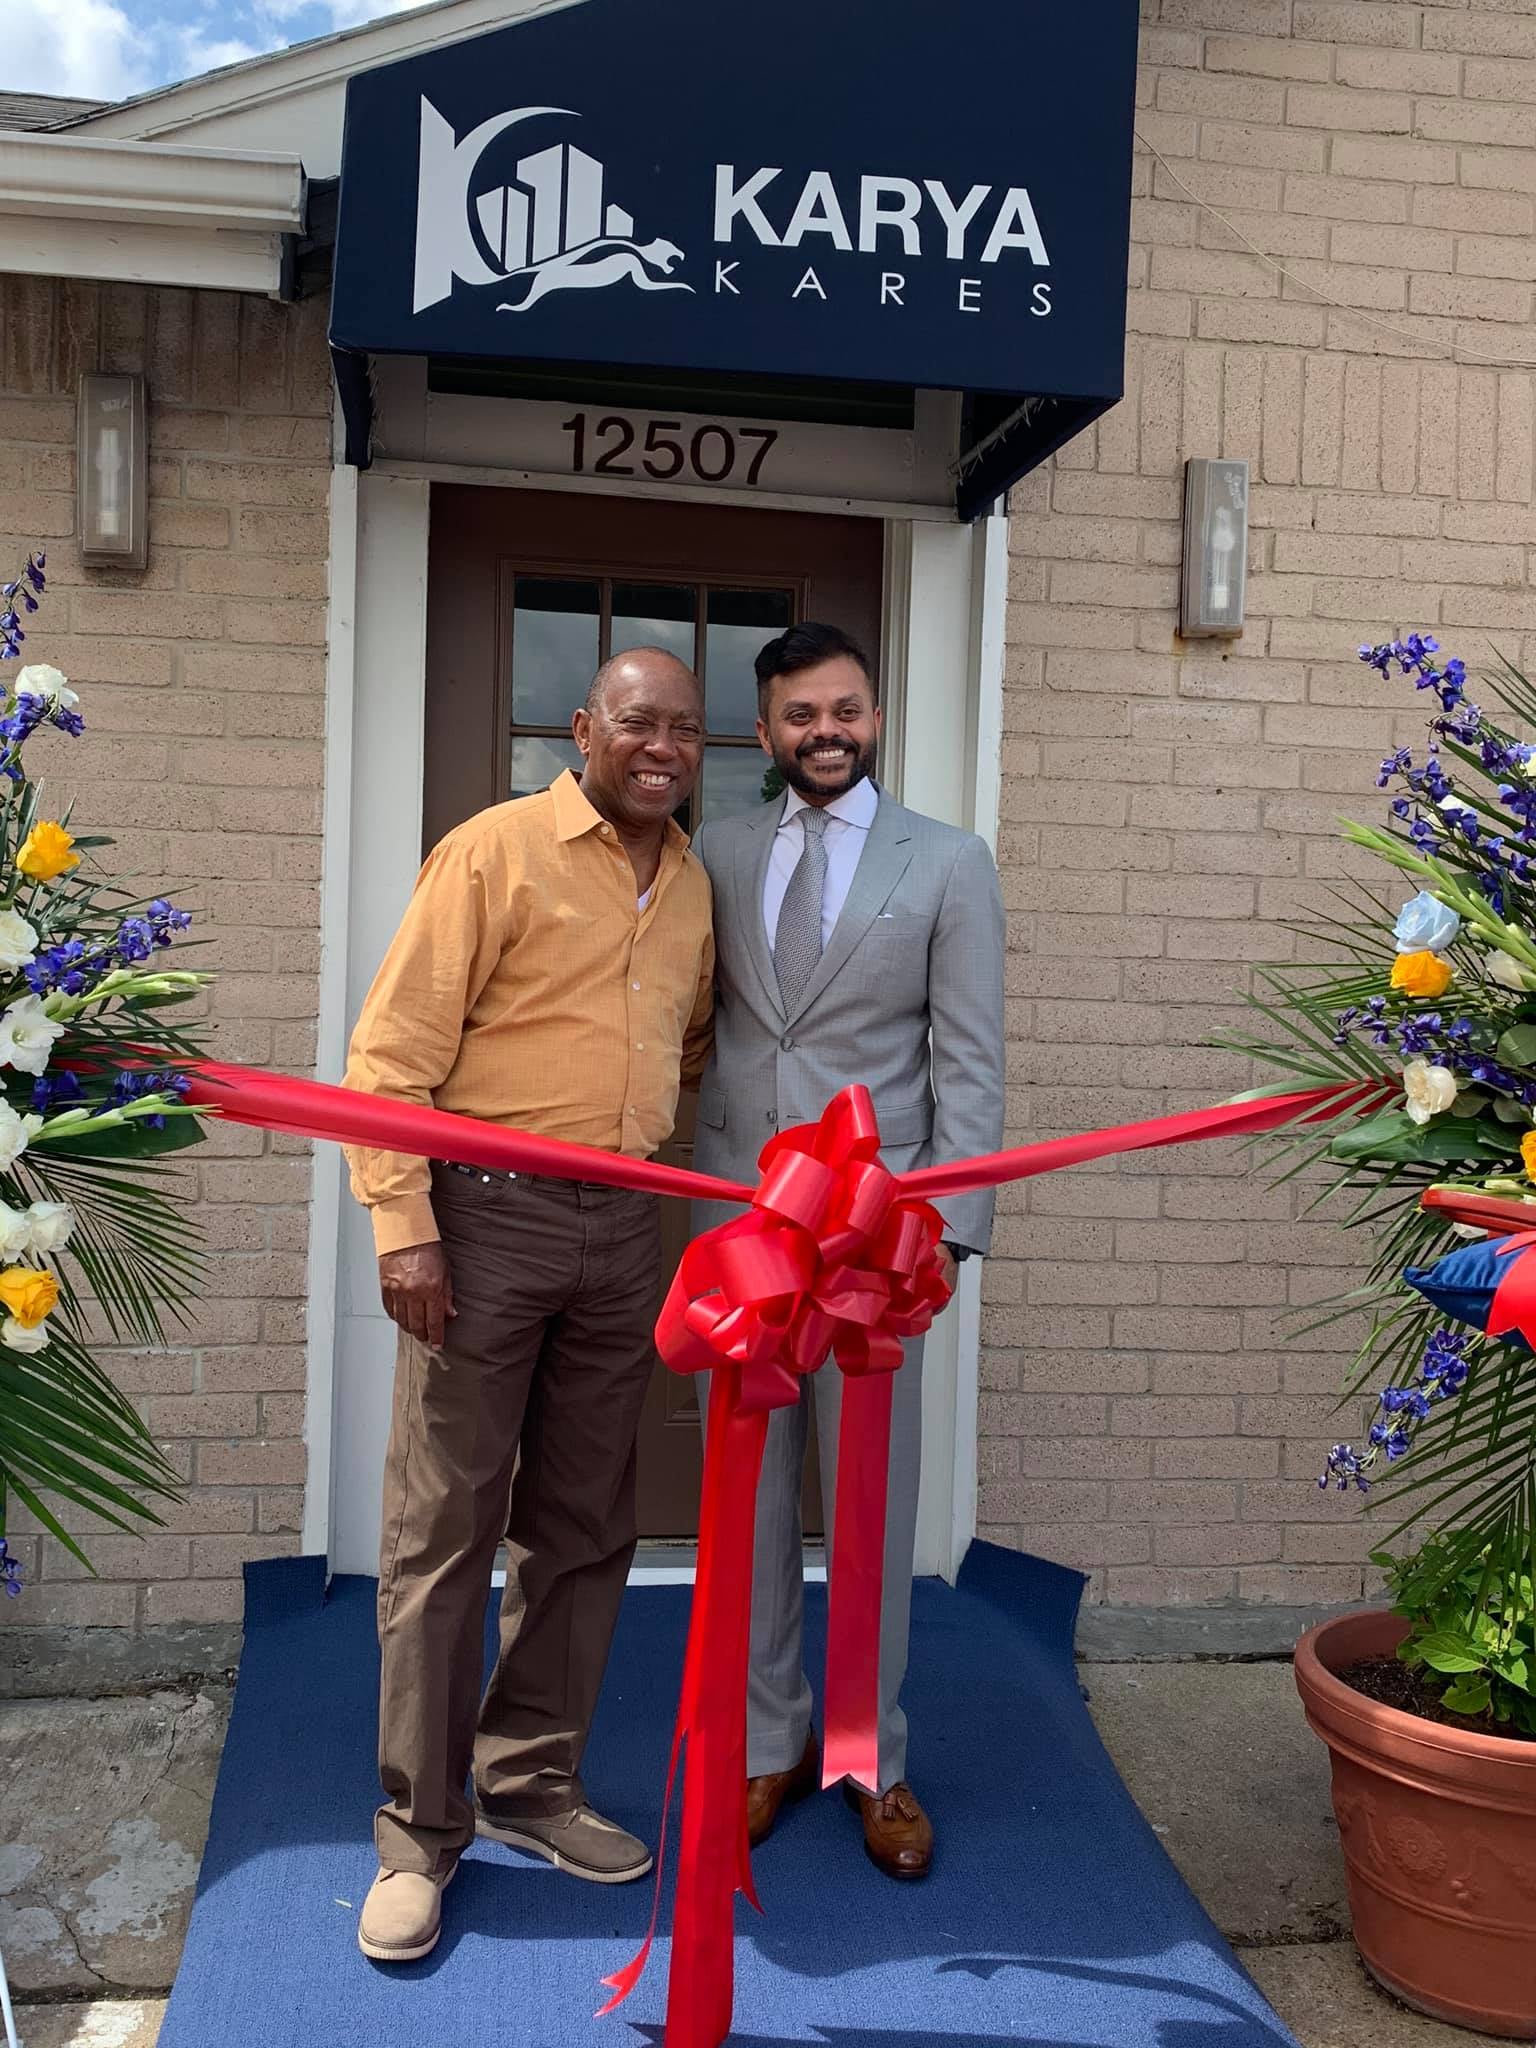 Mayor of Houston Sylvester Turner inaugurated the clinic on May 15th, 2021.